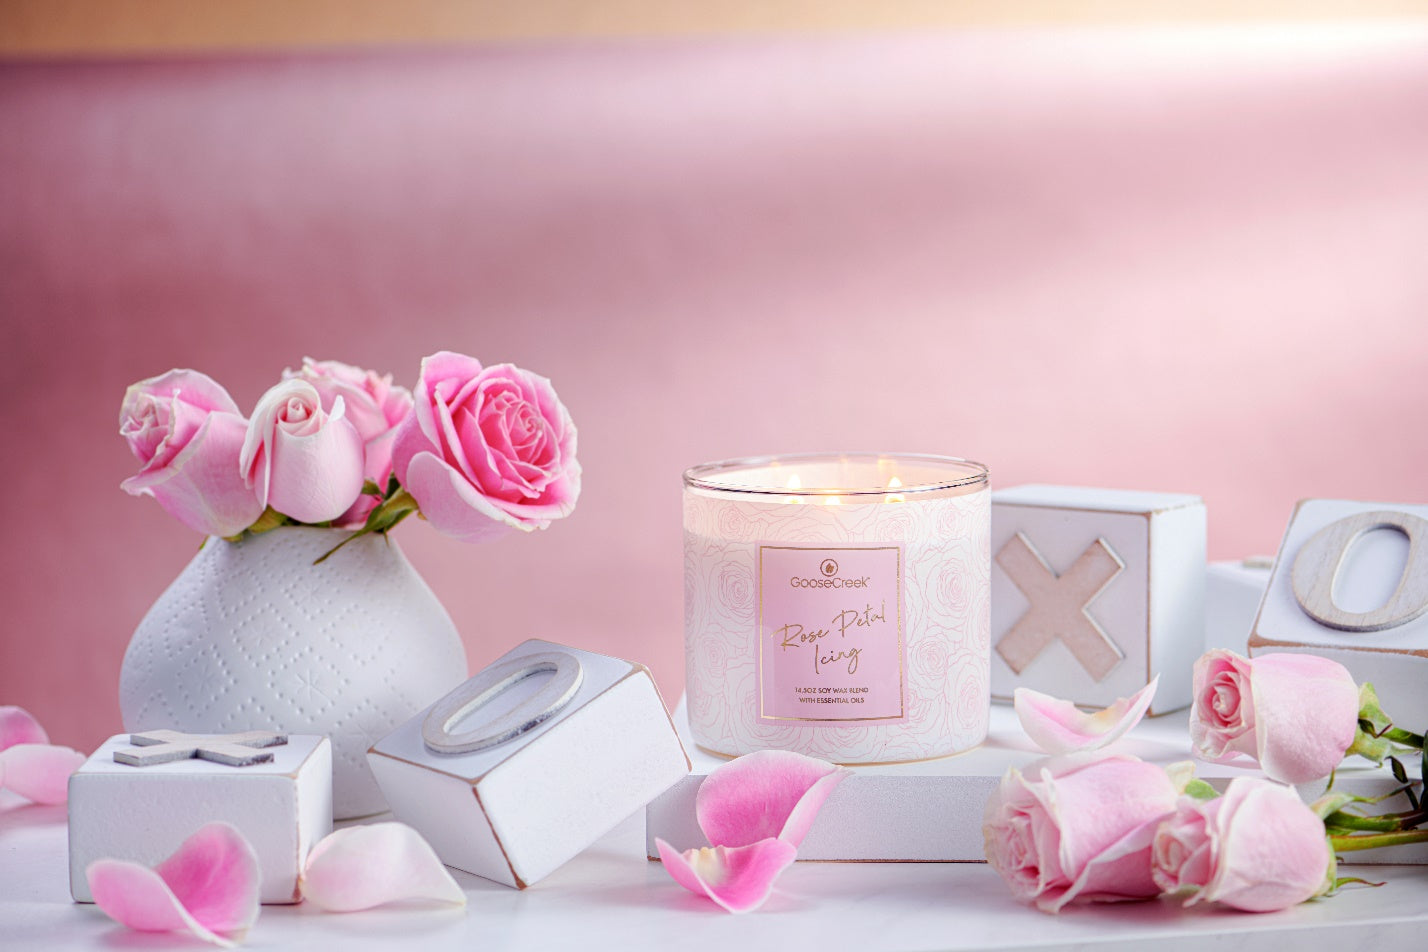 16 Bridal Shower Gift Ideas: Thoughtful Gifts for the Bride-to-Be -  STATIONERS